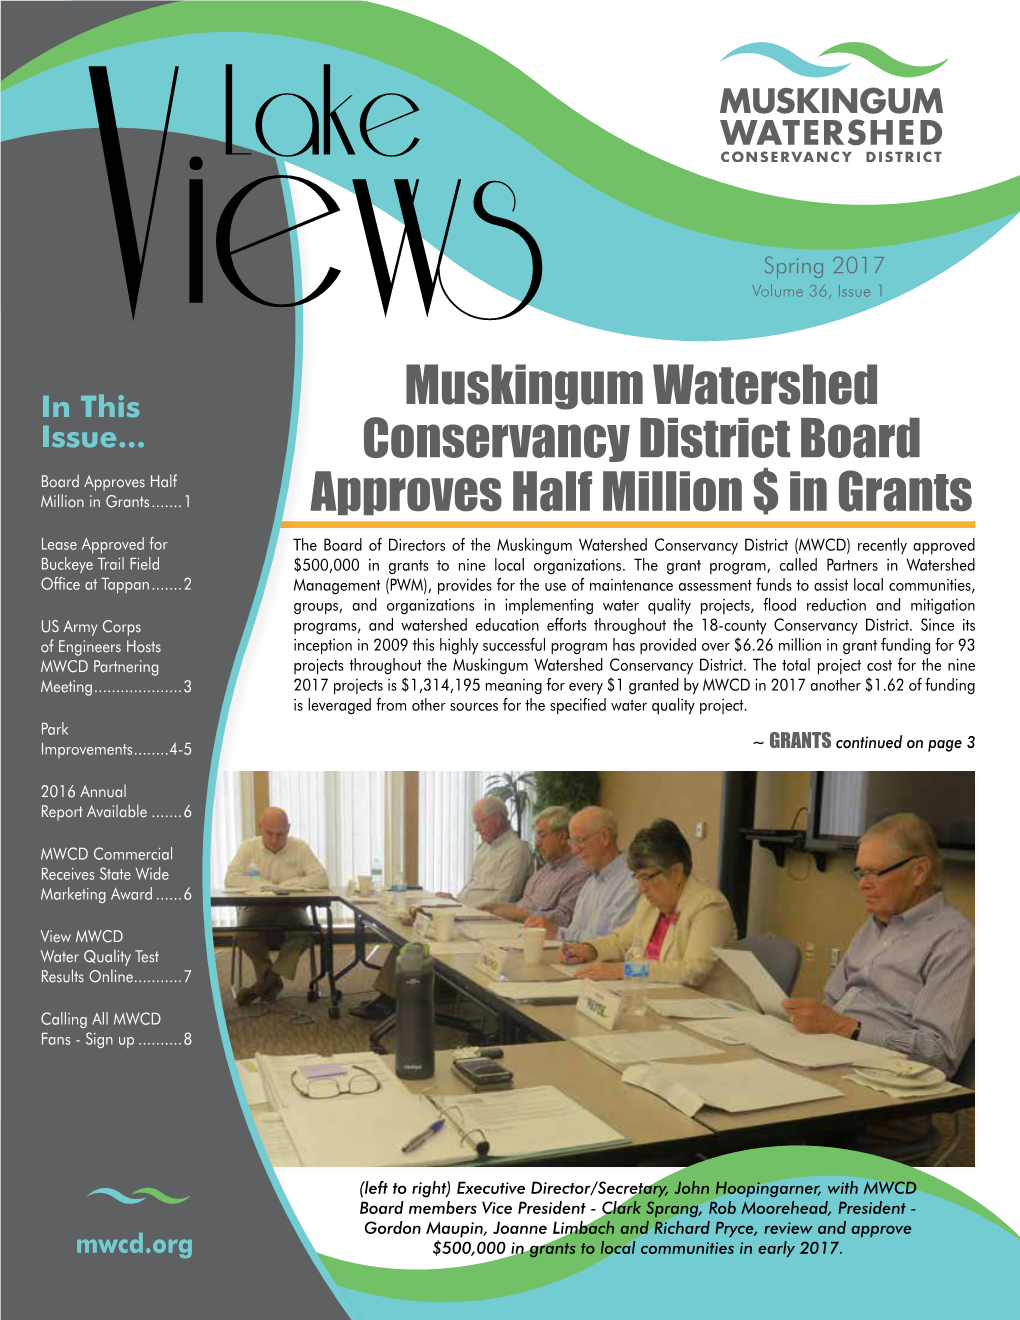 Muskingum Watershed Conservancy District Board Approves Half Million